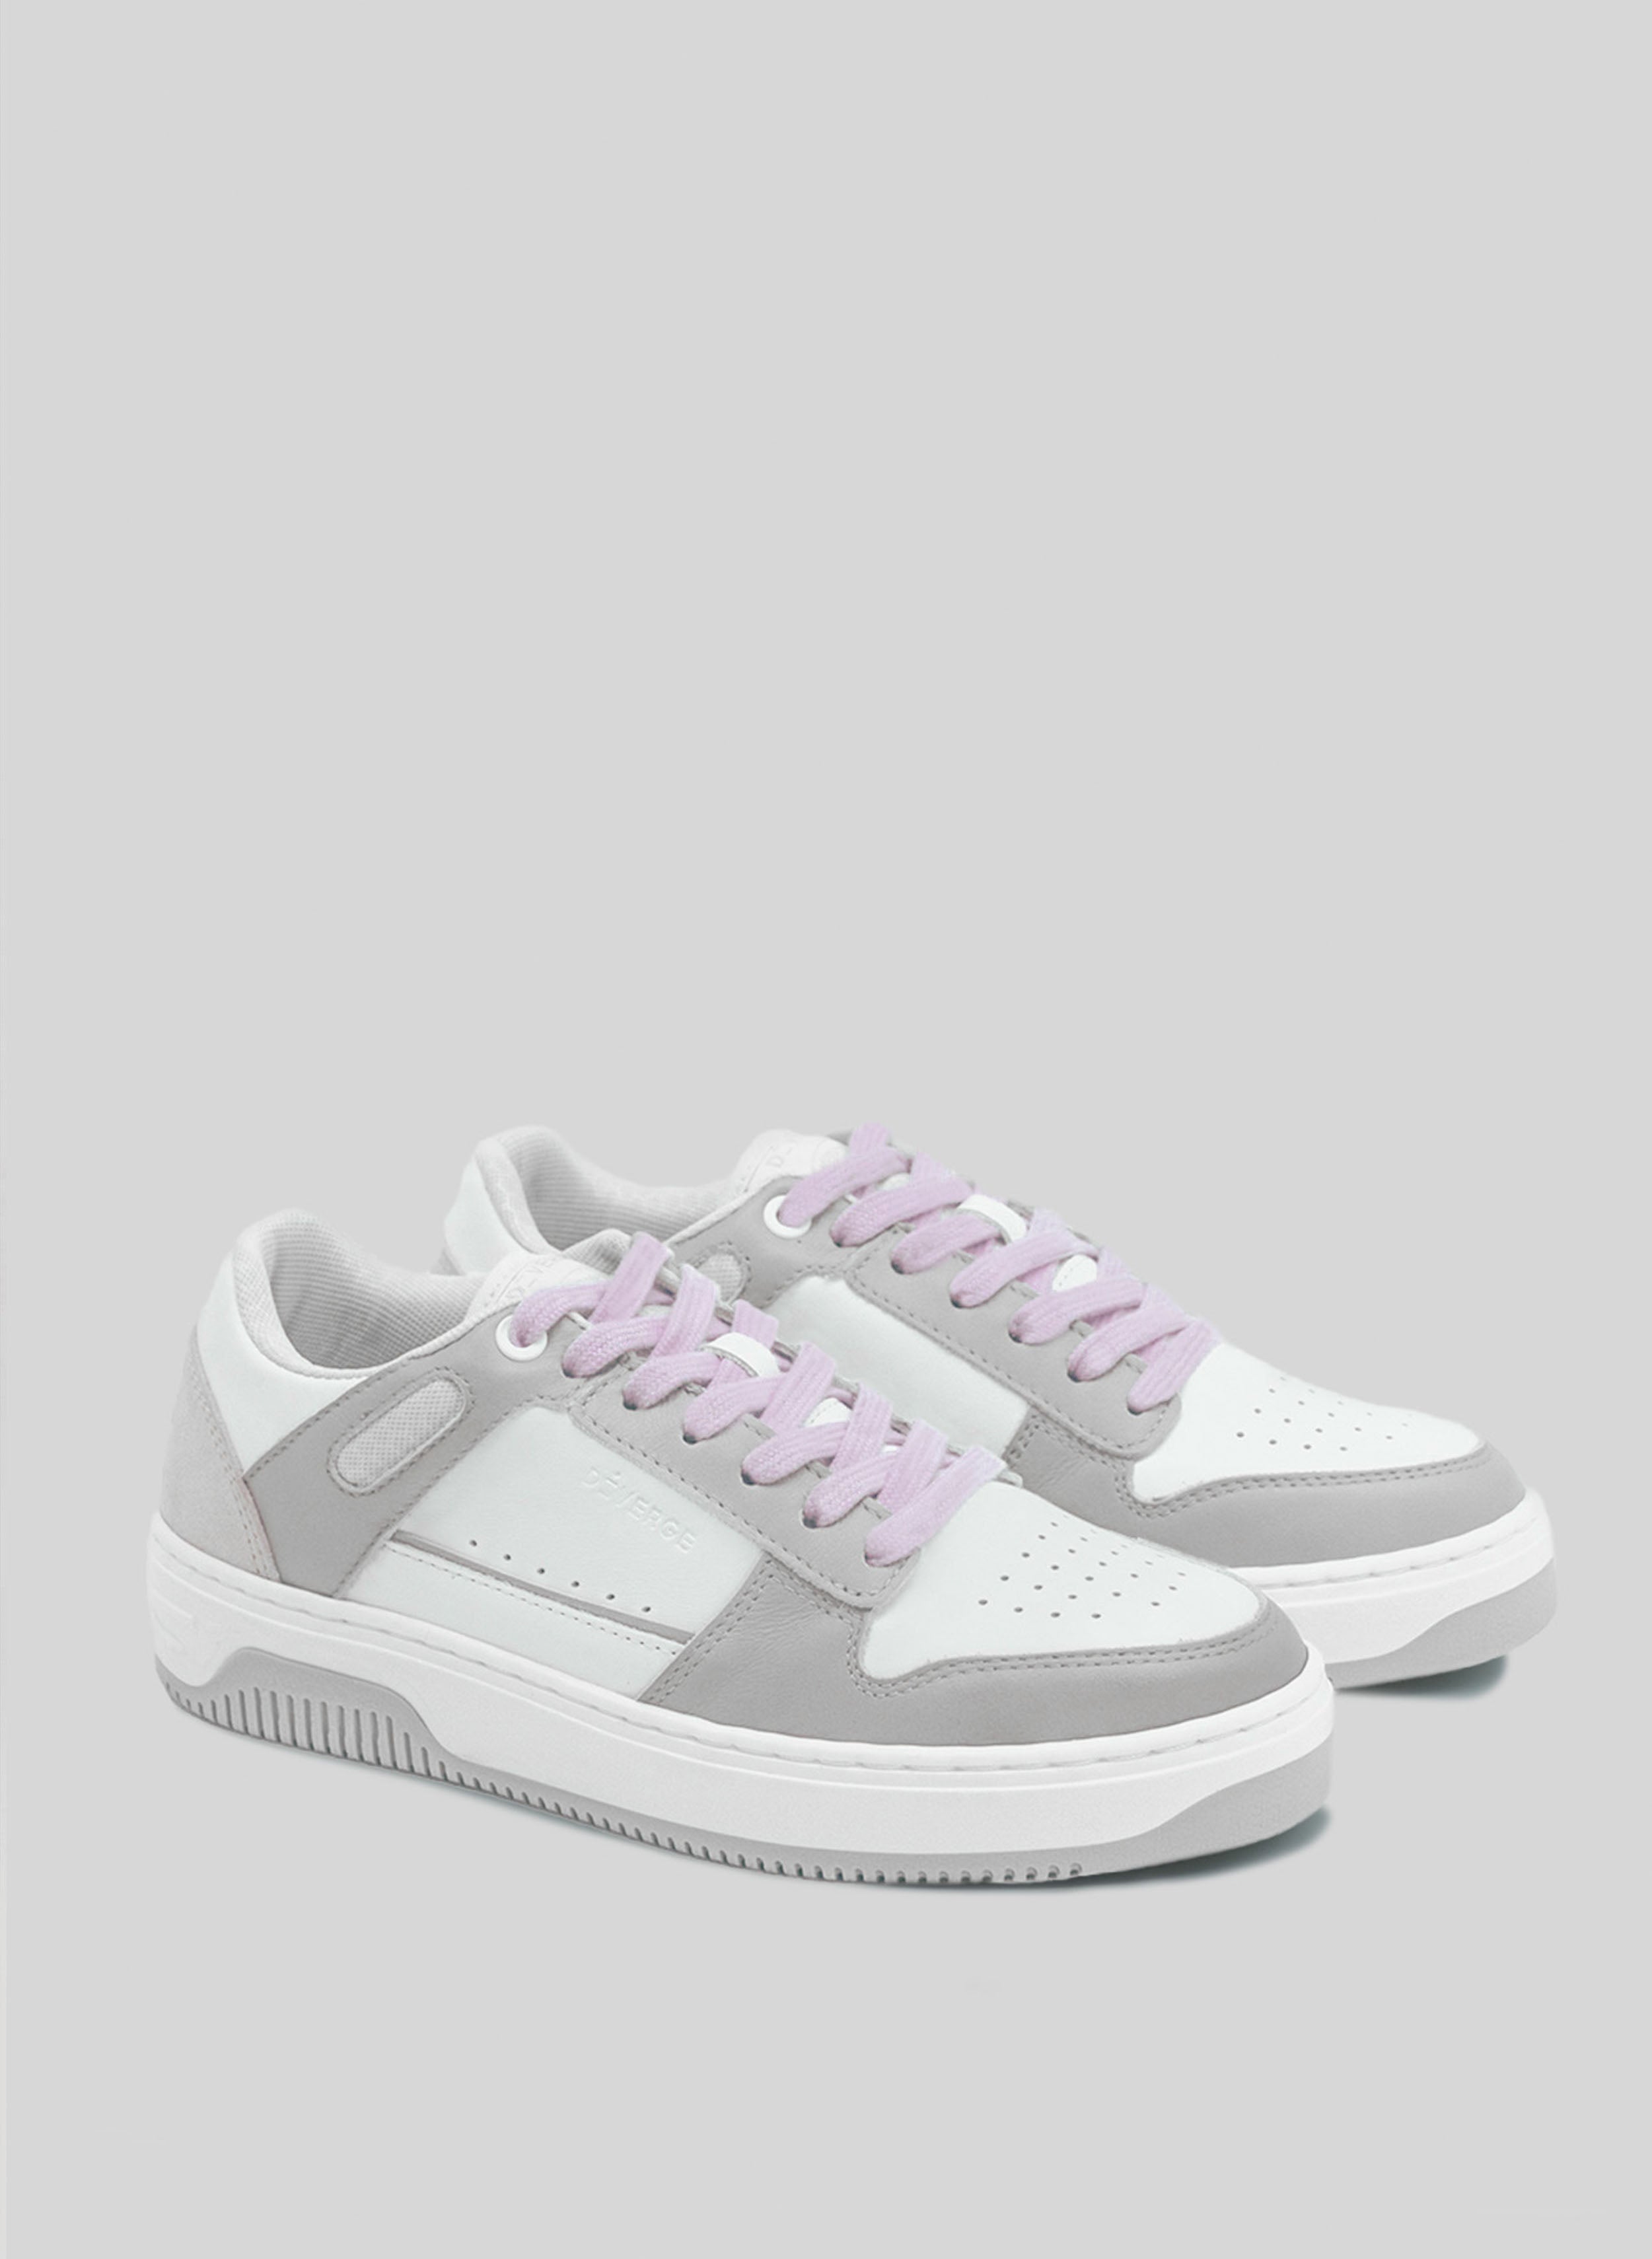 A white and grey sneaker with purple laces, by Diverge promoting social impact and custom shoes throught the imagine project.